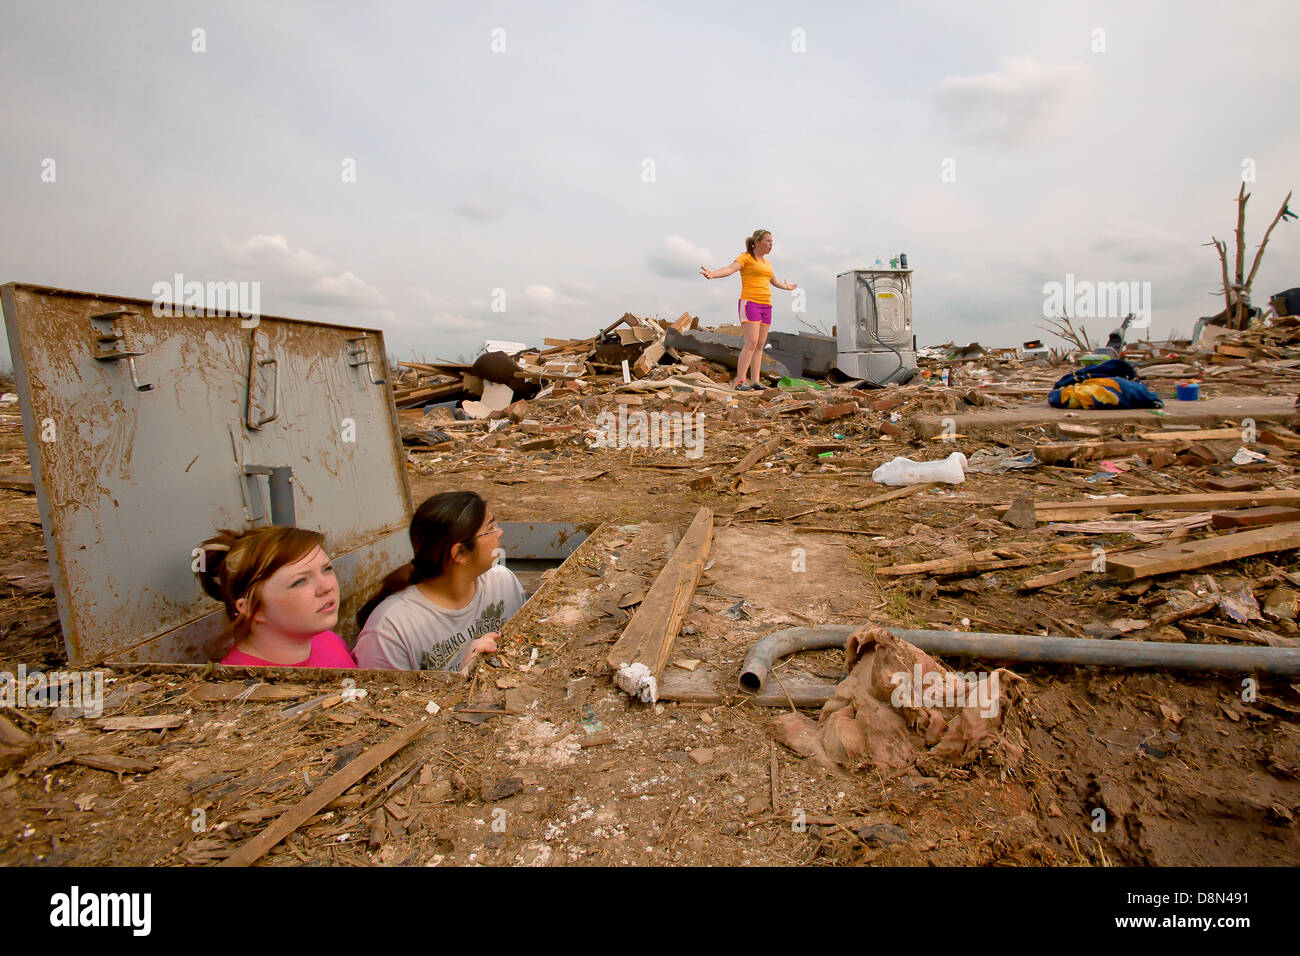 Young girls view the remains of their home from where they hid in a storm shelter in the aftermath of an EF-5 tornado May 24, 2013 in Moore, Oklahoma. The massive storm with winds exceeding 200 miles per hour tore through the Oklahoma City suburb May 20, 2013, killing at least 24 people, injuring more than 230 and displacing thousands. Stock Photo